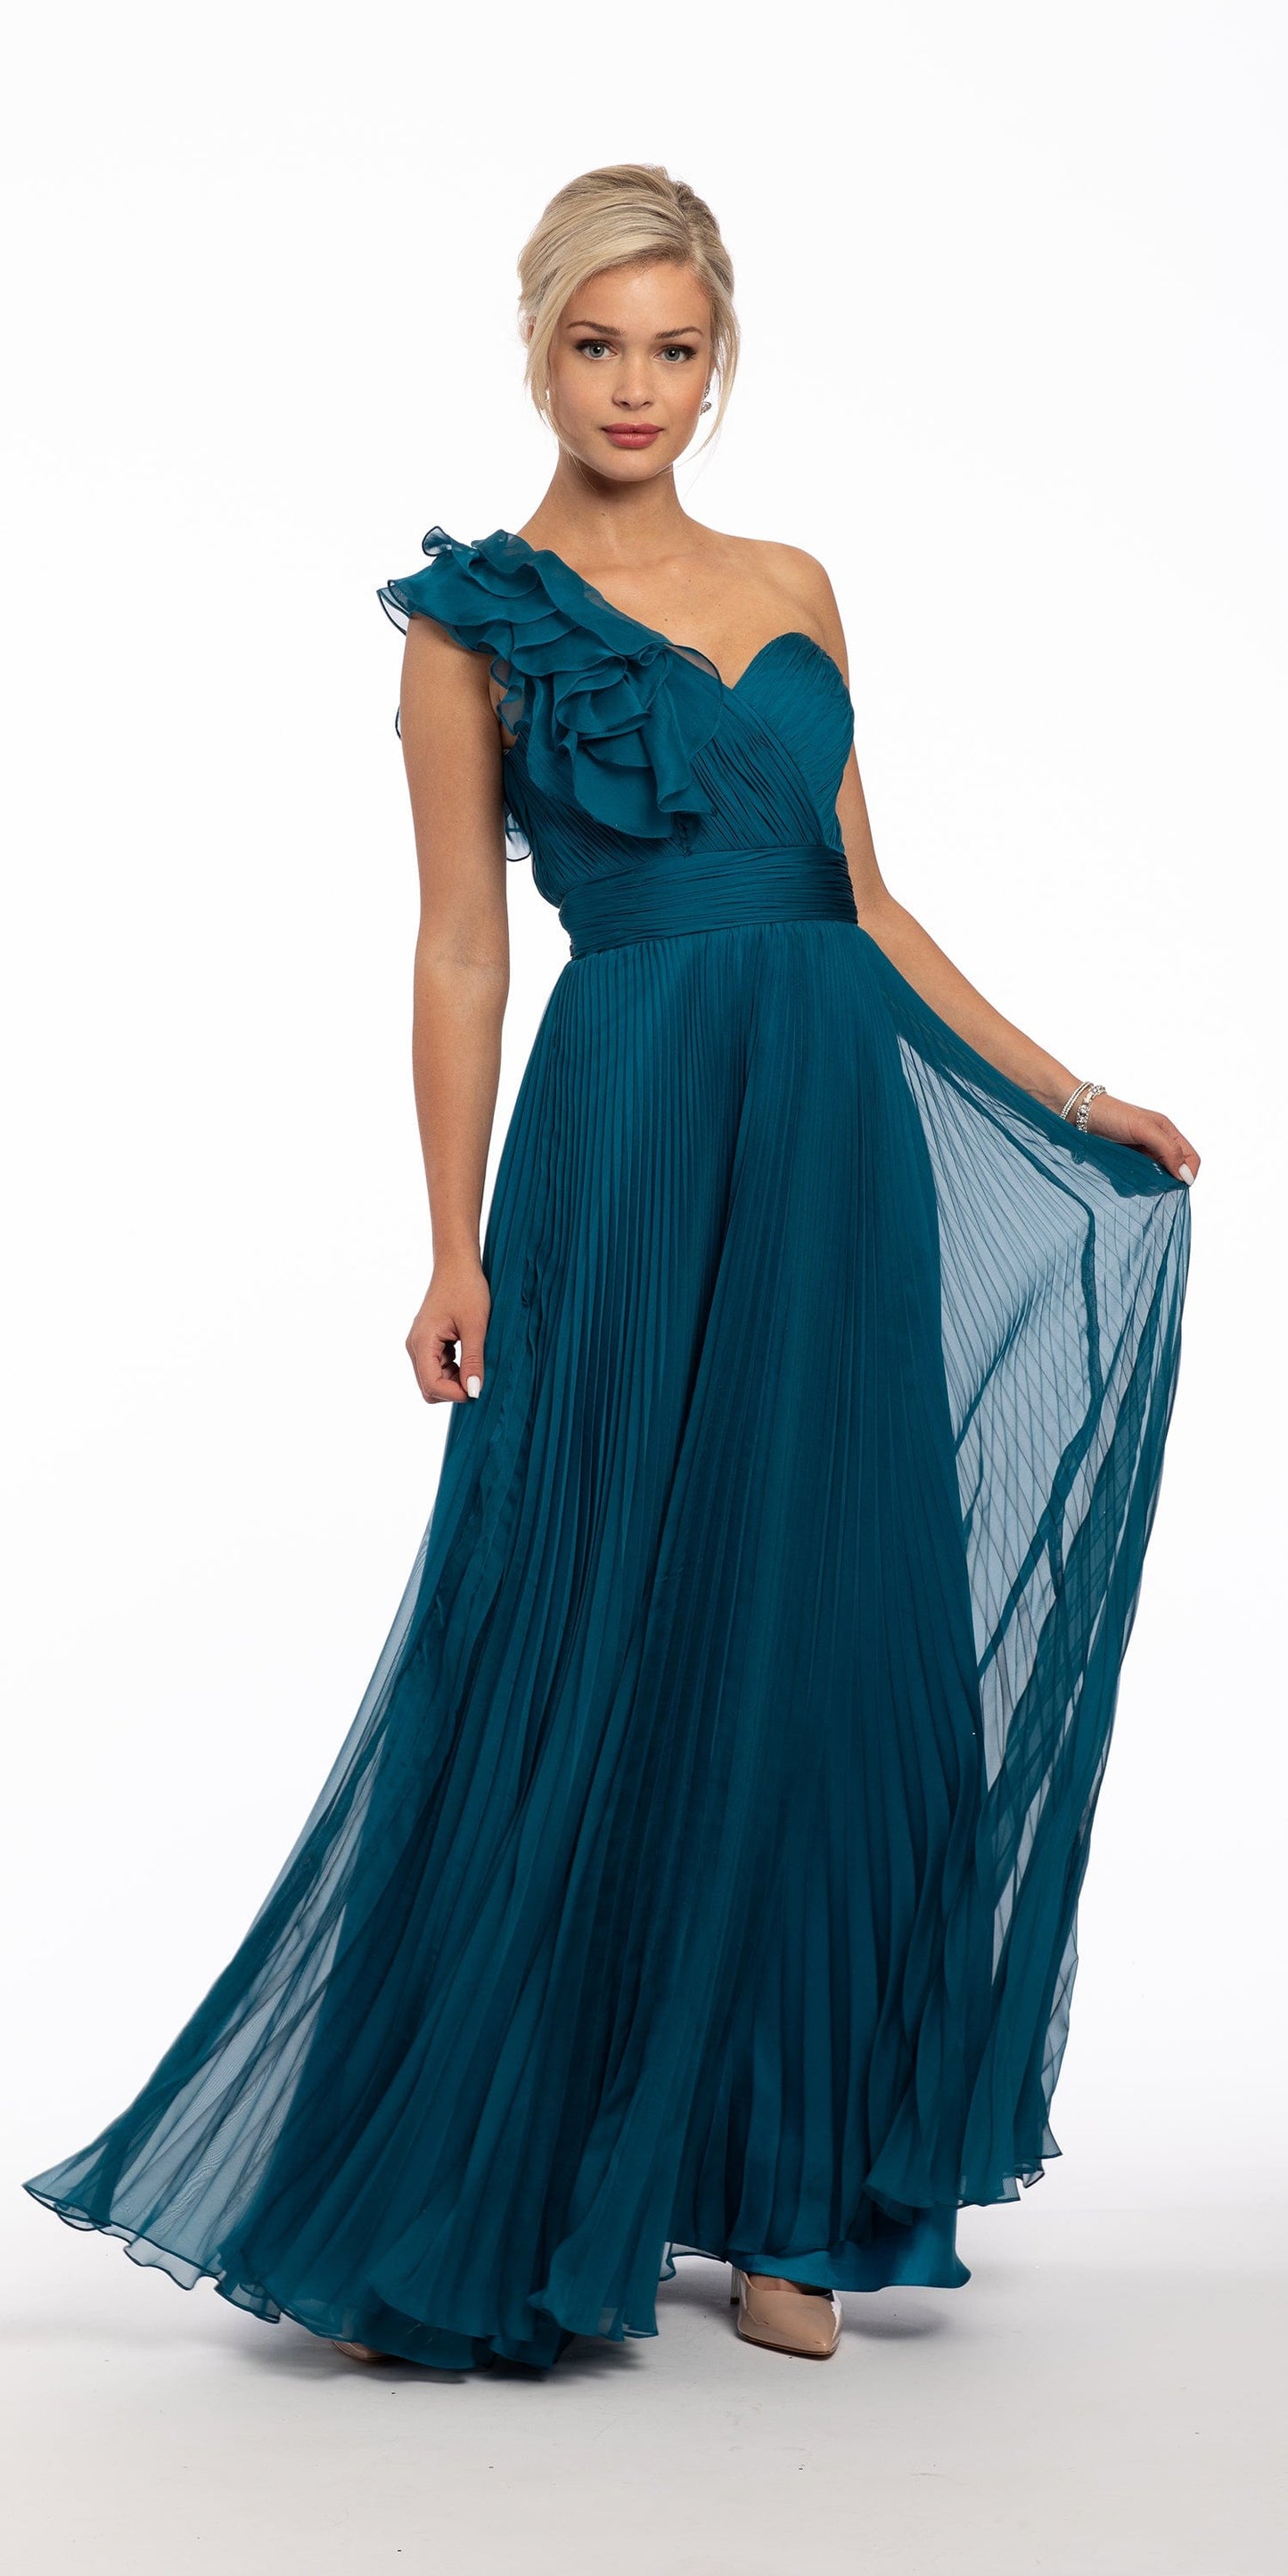 Camille La Vie Ruffle One Shoulder Pleated A Line Dress missy / 6 / teal